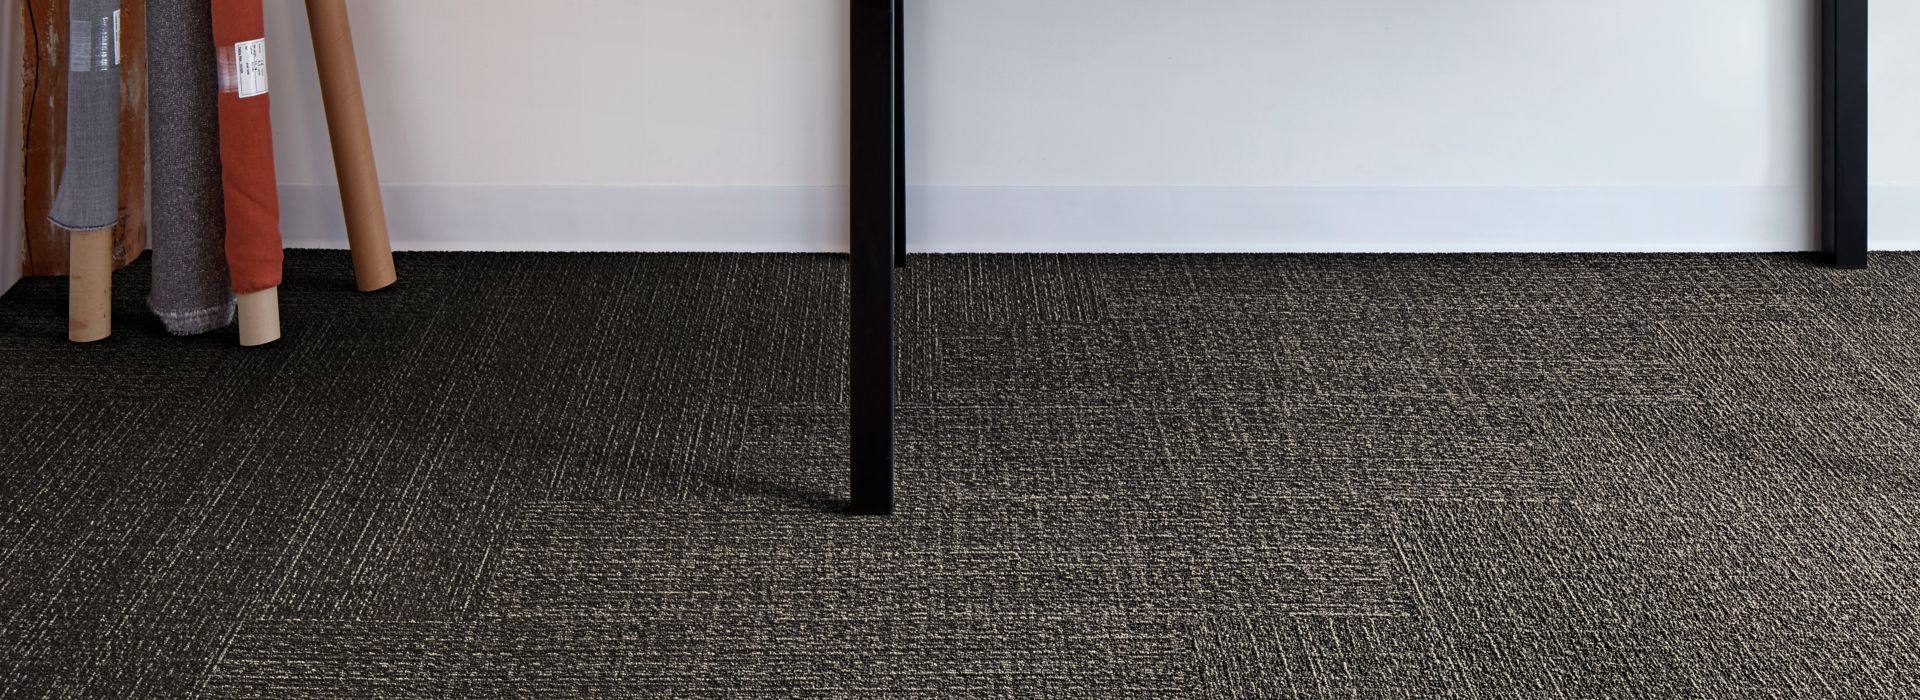 Interface Shishu Stitch and Shade plank carpet tile in workspace with table número de imagen 1